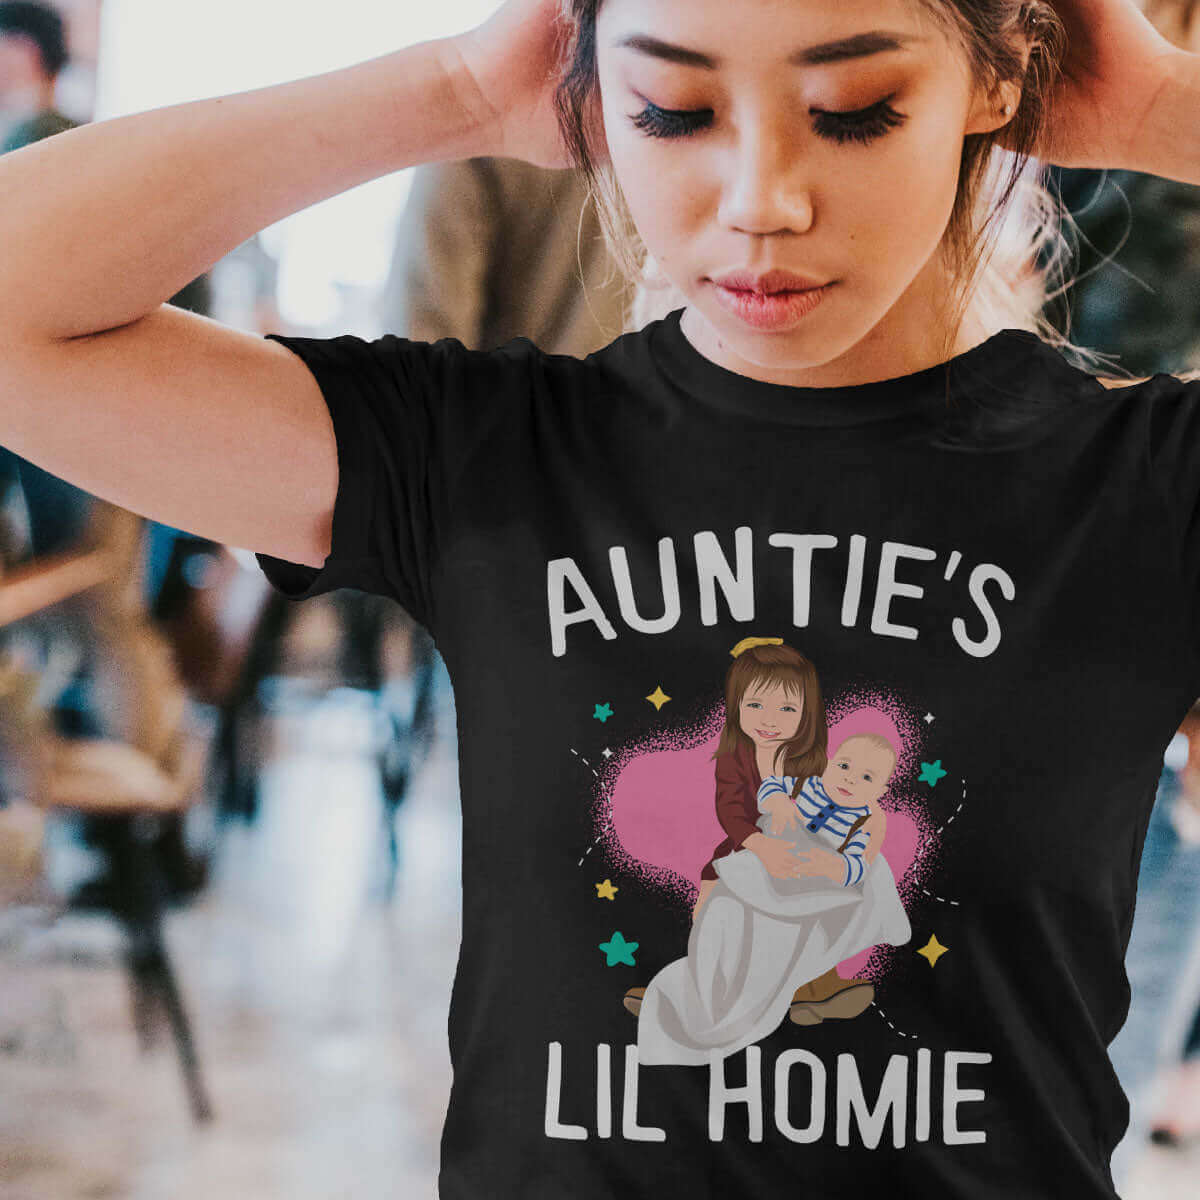 Personalized Auntie Shirt